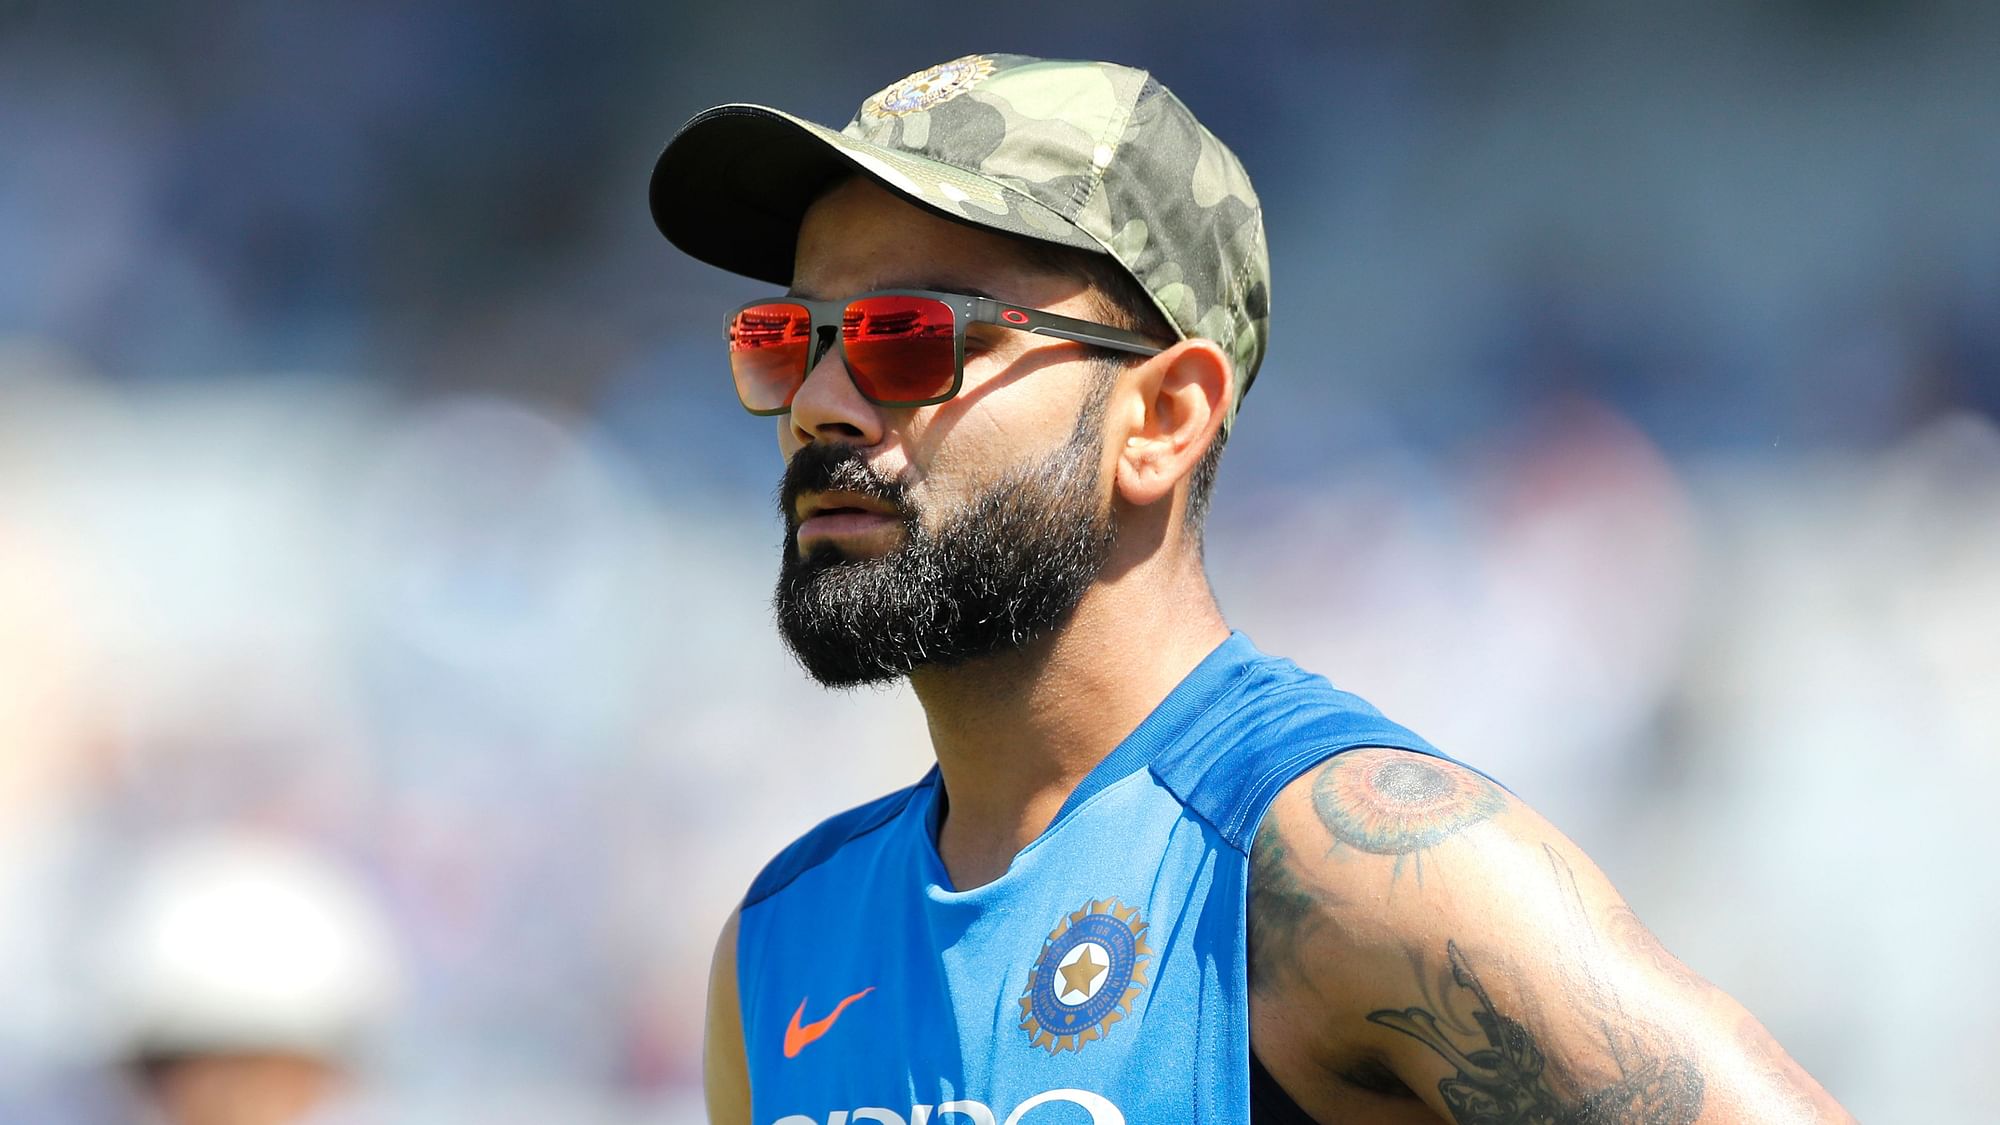 The Indian cricket team was granted permission to wear camouflage caps during an ODI against Australia in Ranchi. 